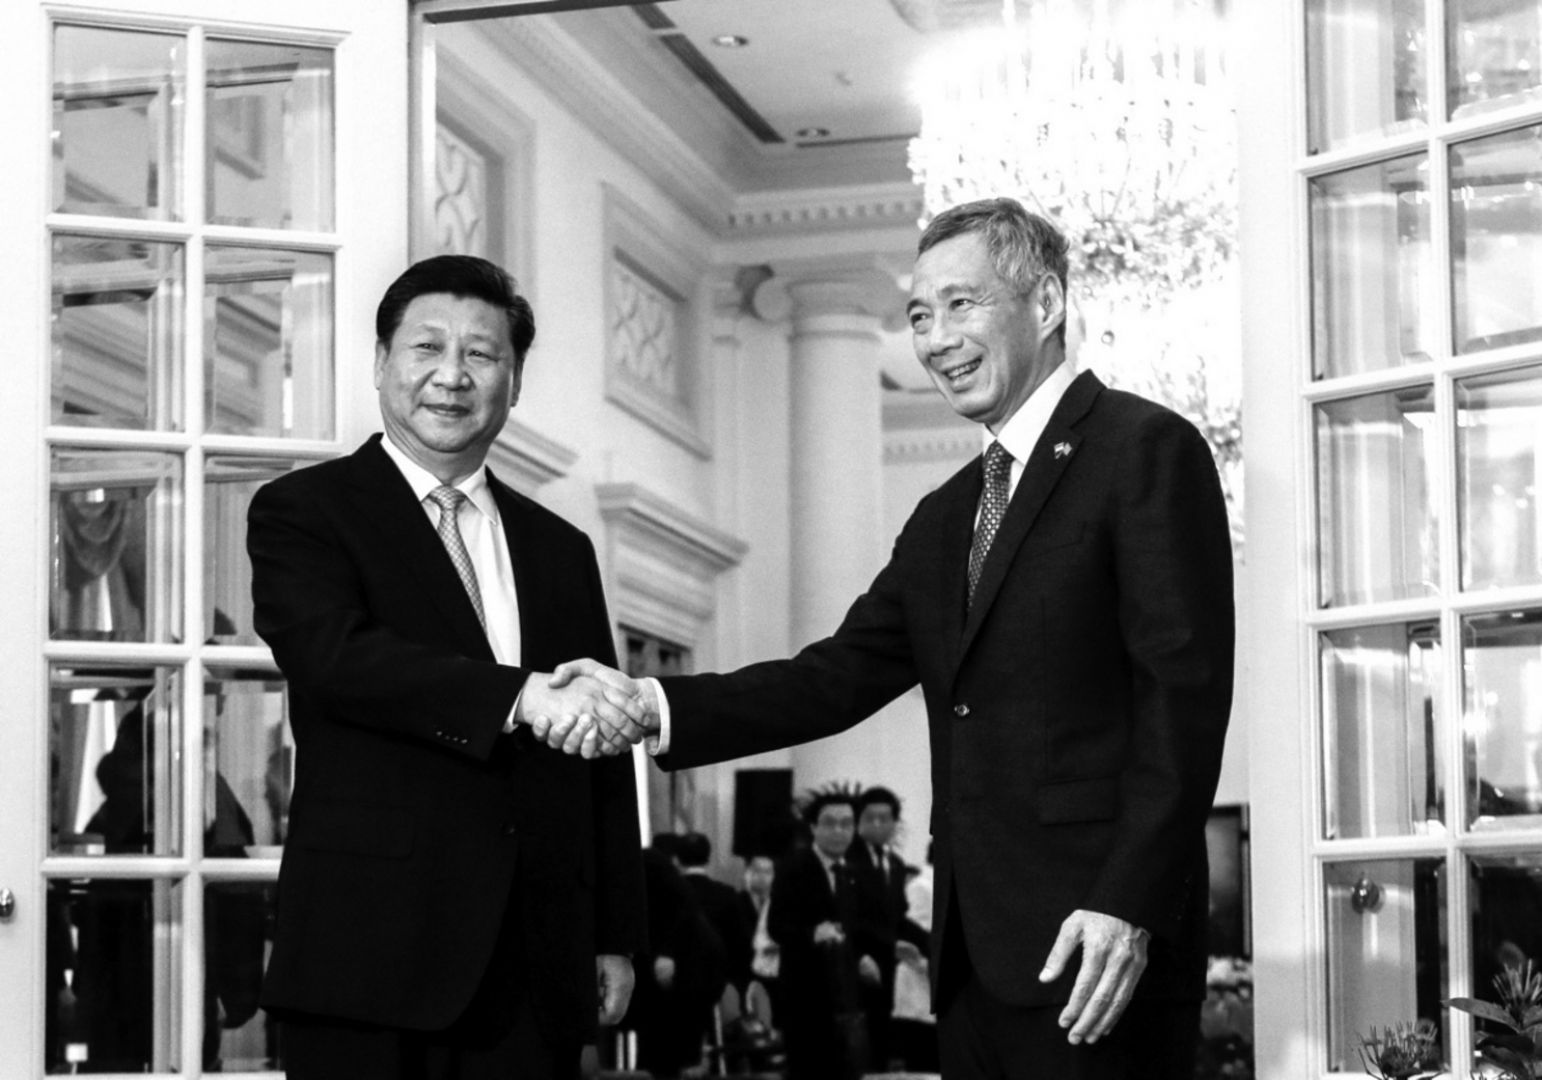 Chinese President Xi Jinping(L) and Singapore Prime Minister Lee Hsien Loong shake hands for the media at the Istana presidential palace in Singapore, November 7, 2015. REUTERS/Wallace Woon/Pool